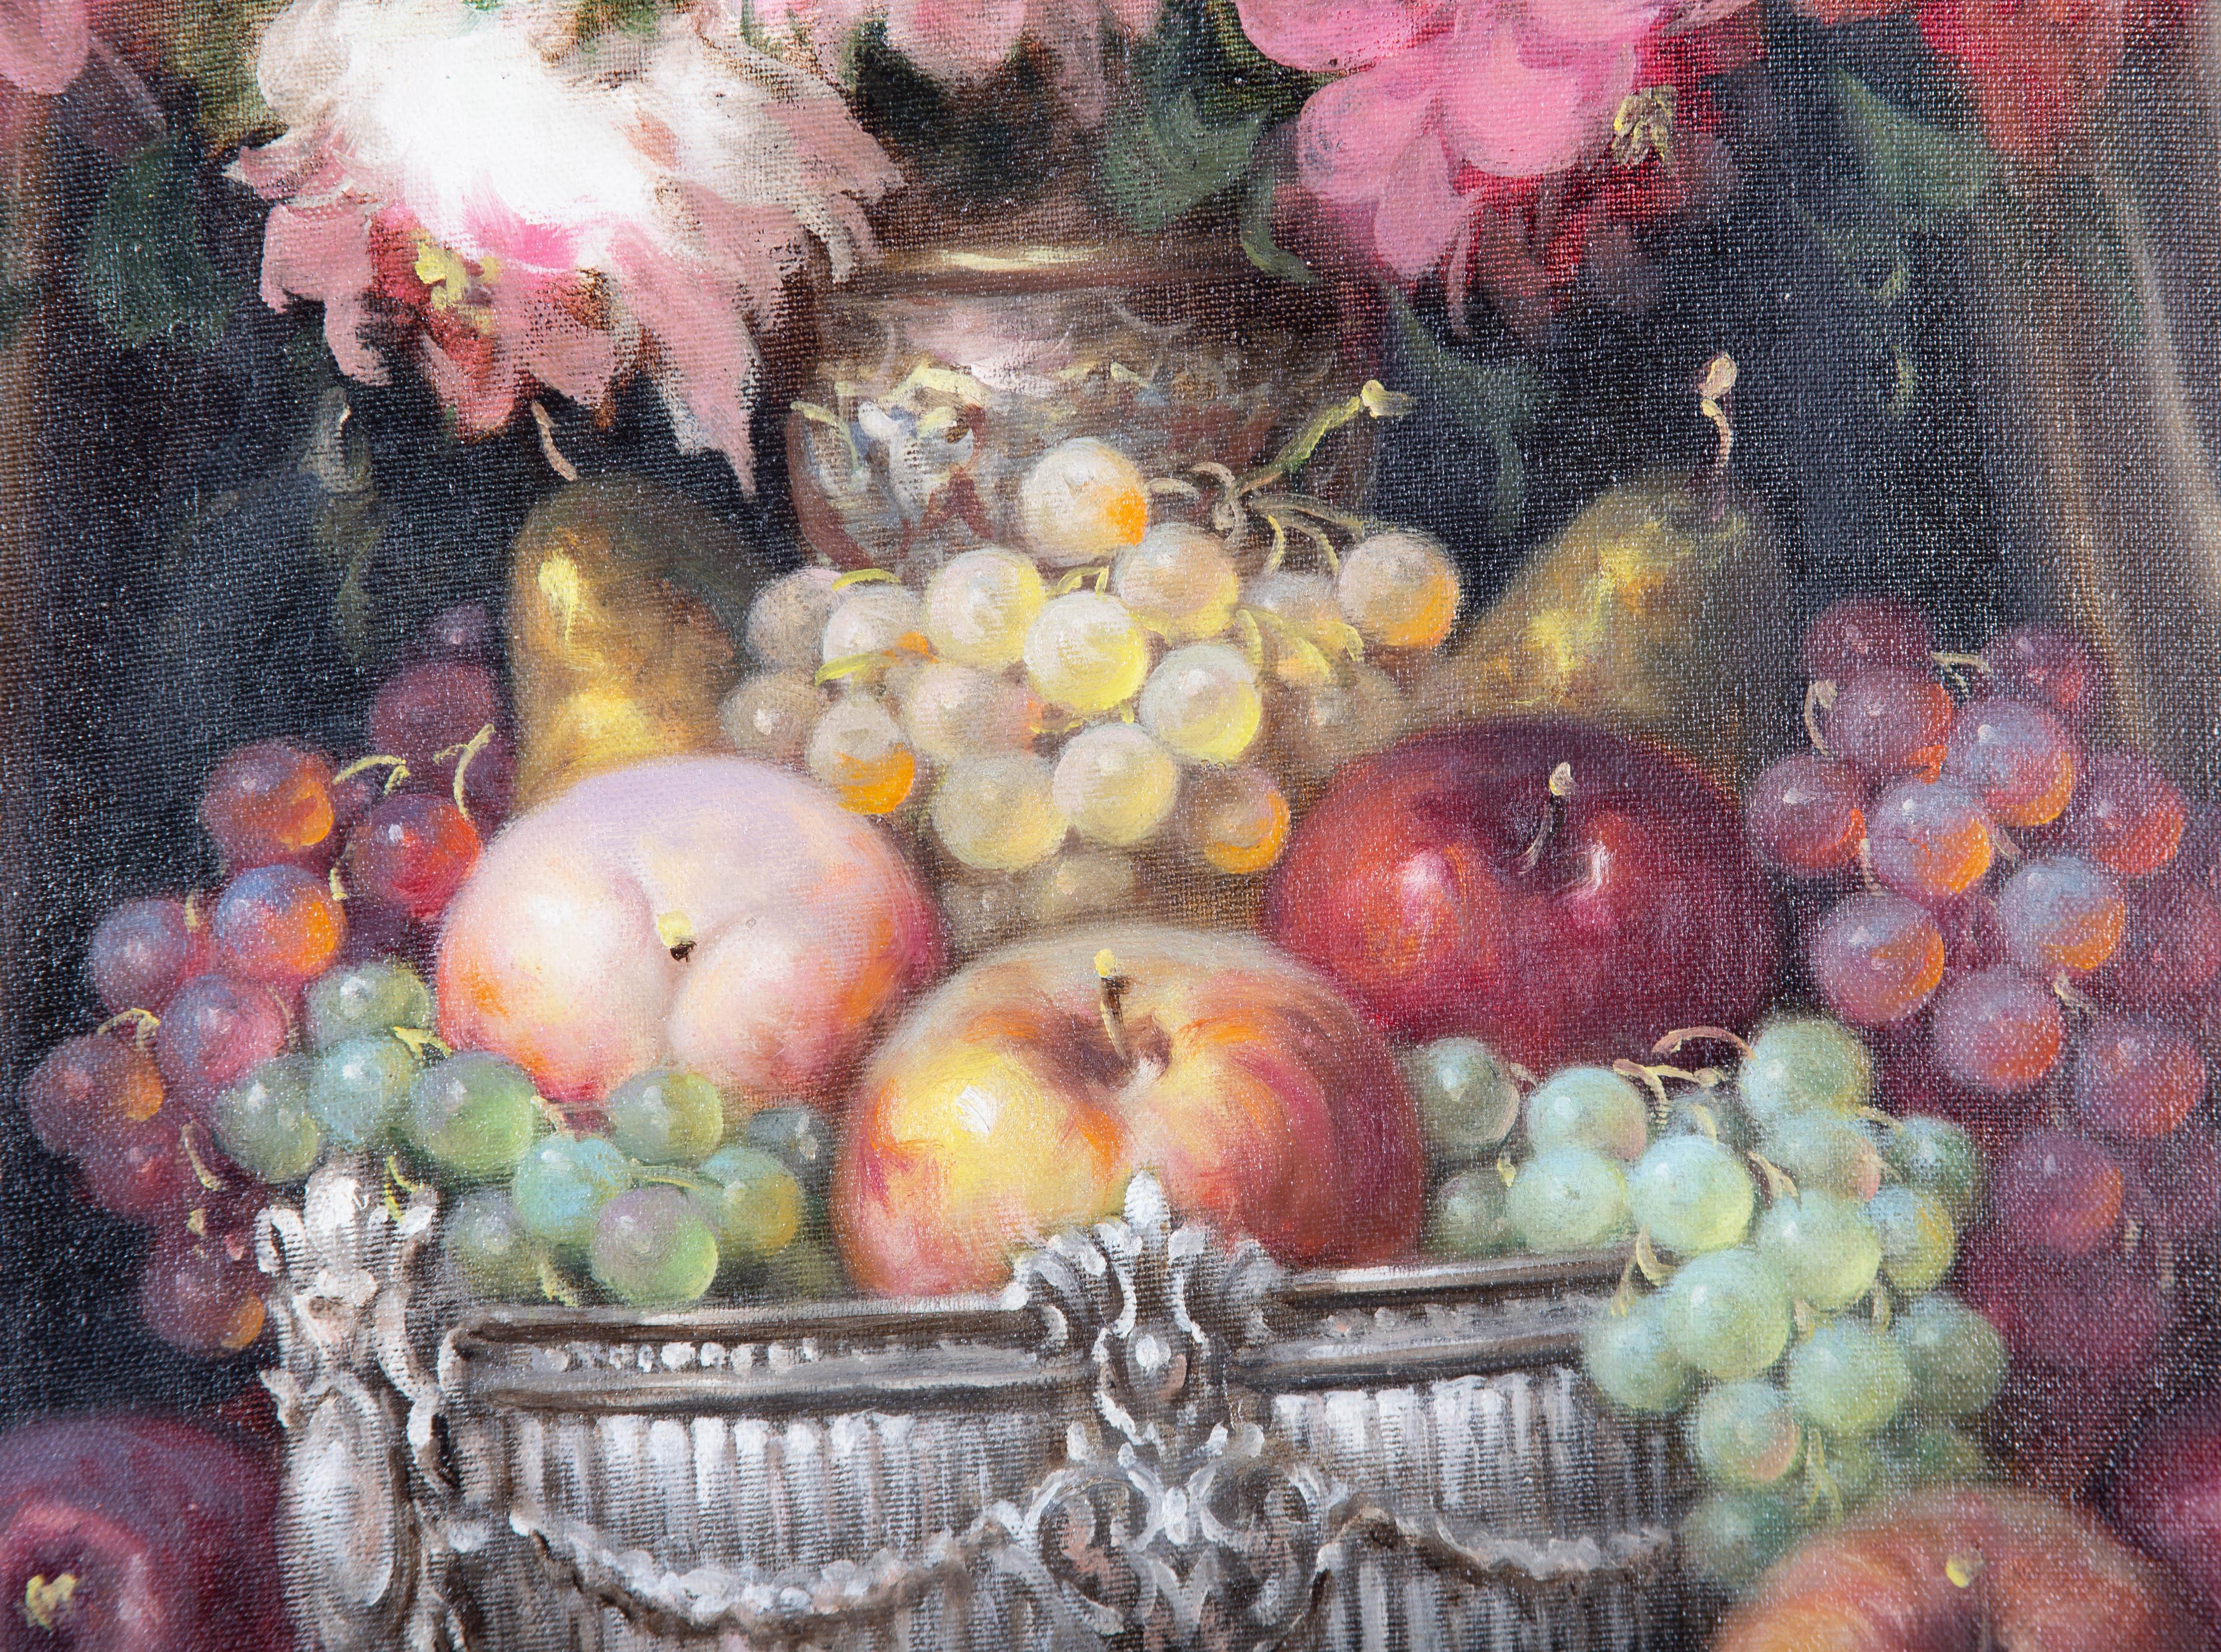 A fine and accomplished oil painting by Hungarian artist Bela Balogh, depicting a still life scene with fruit in a silver bowl, roses in a vase behind, a wine ewer and a silver goblet. Signed to the lower right-hand corner. Well-presented in an